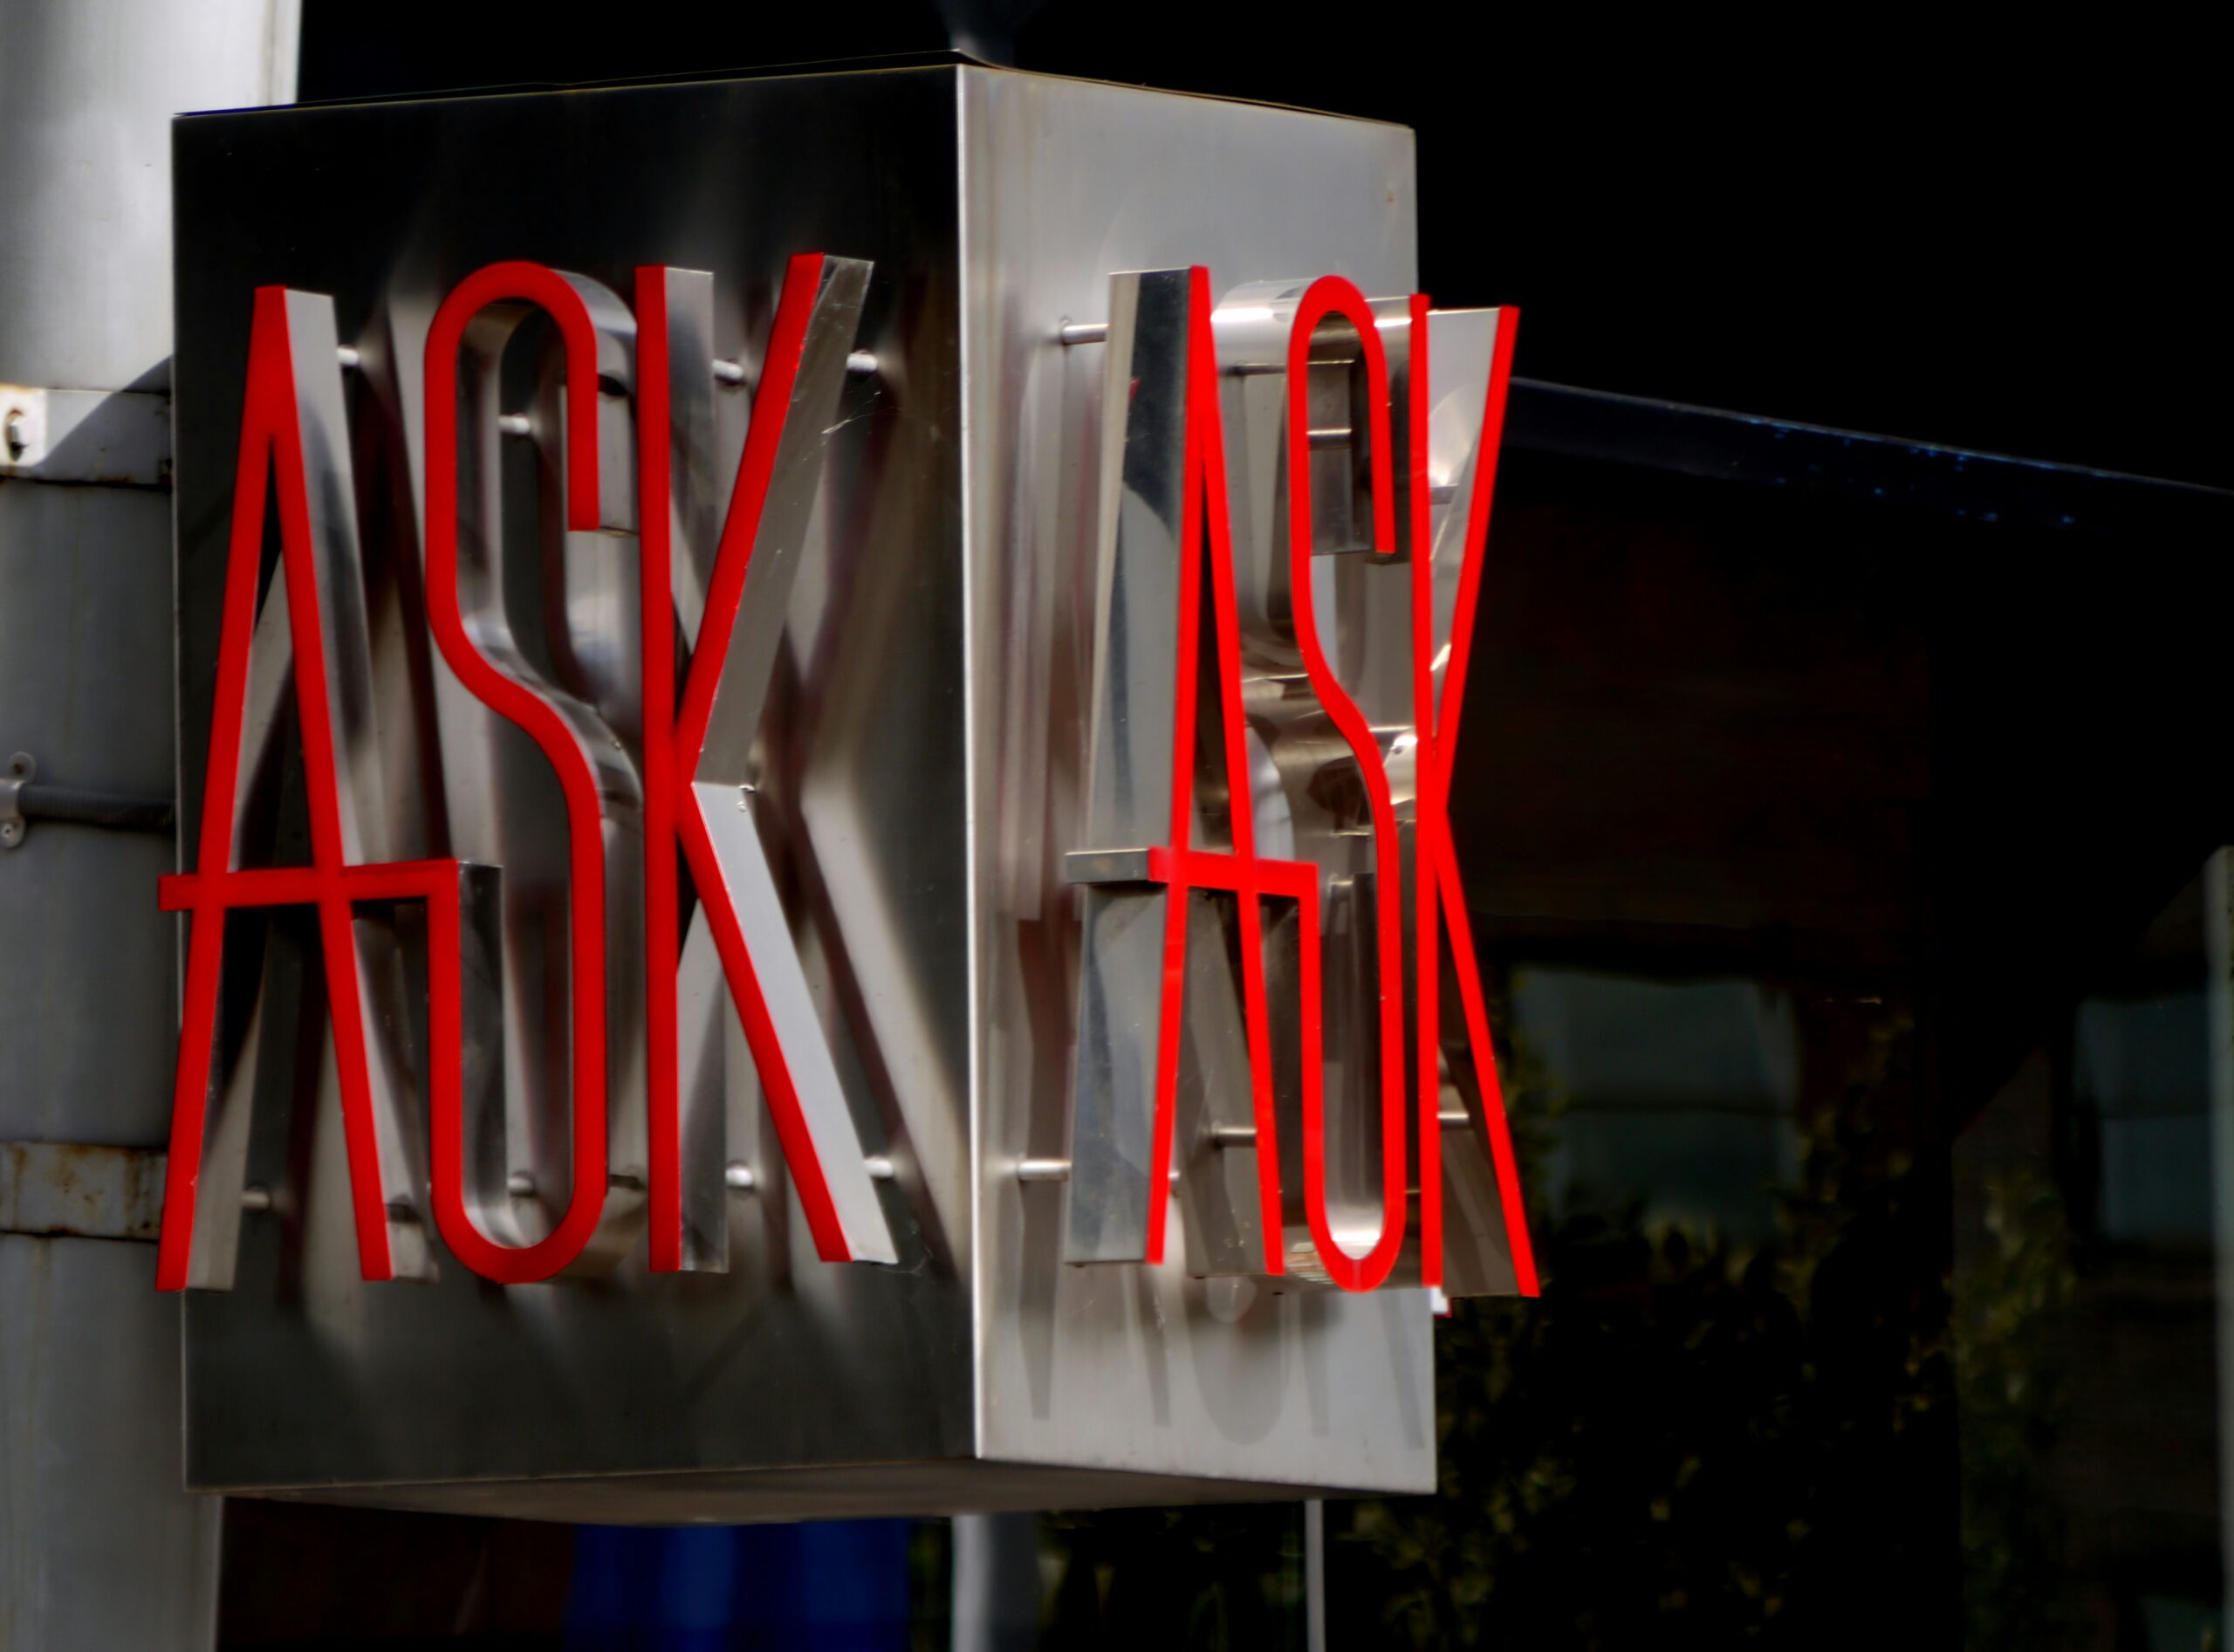 A neon sign reading “ask” on both sides